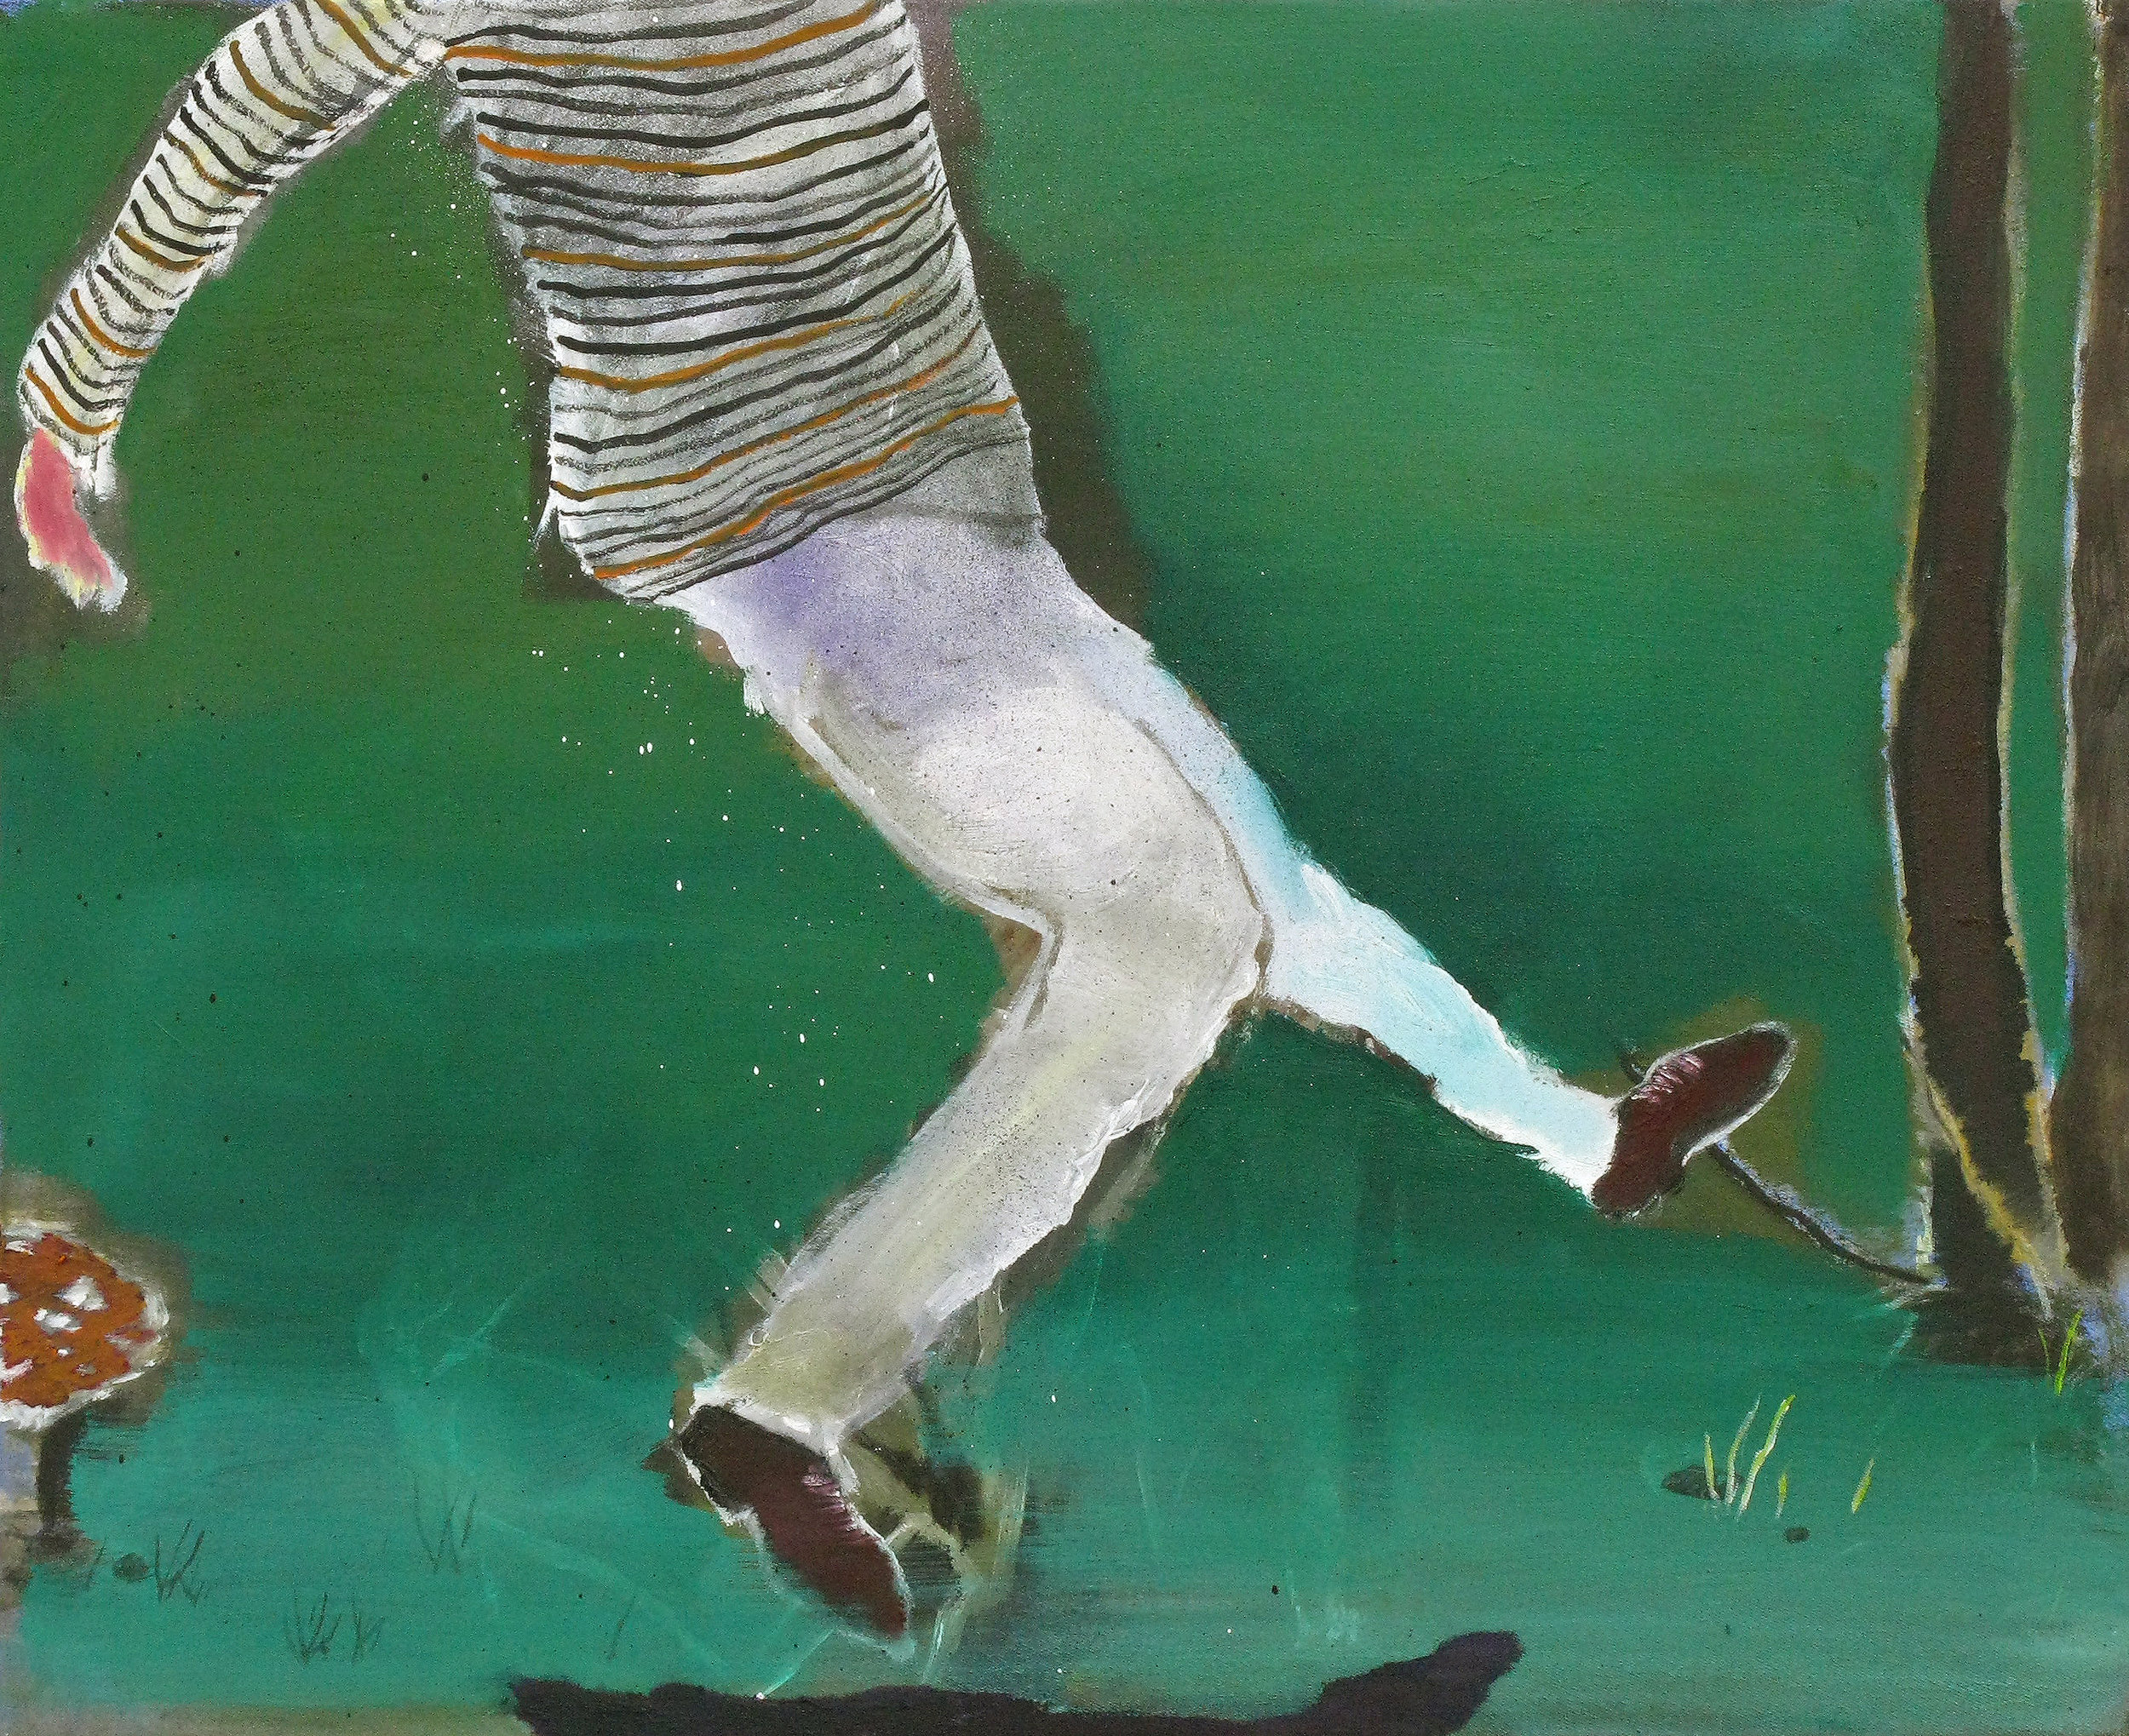   CHRISTOPH ROßNER   Dancer,&nbsp; oil and lacquer on canvas, 17.75" x 21.5", 2008 